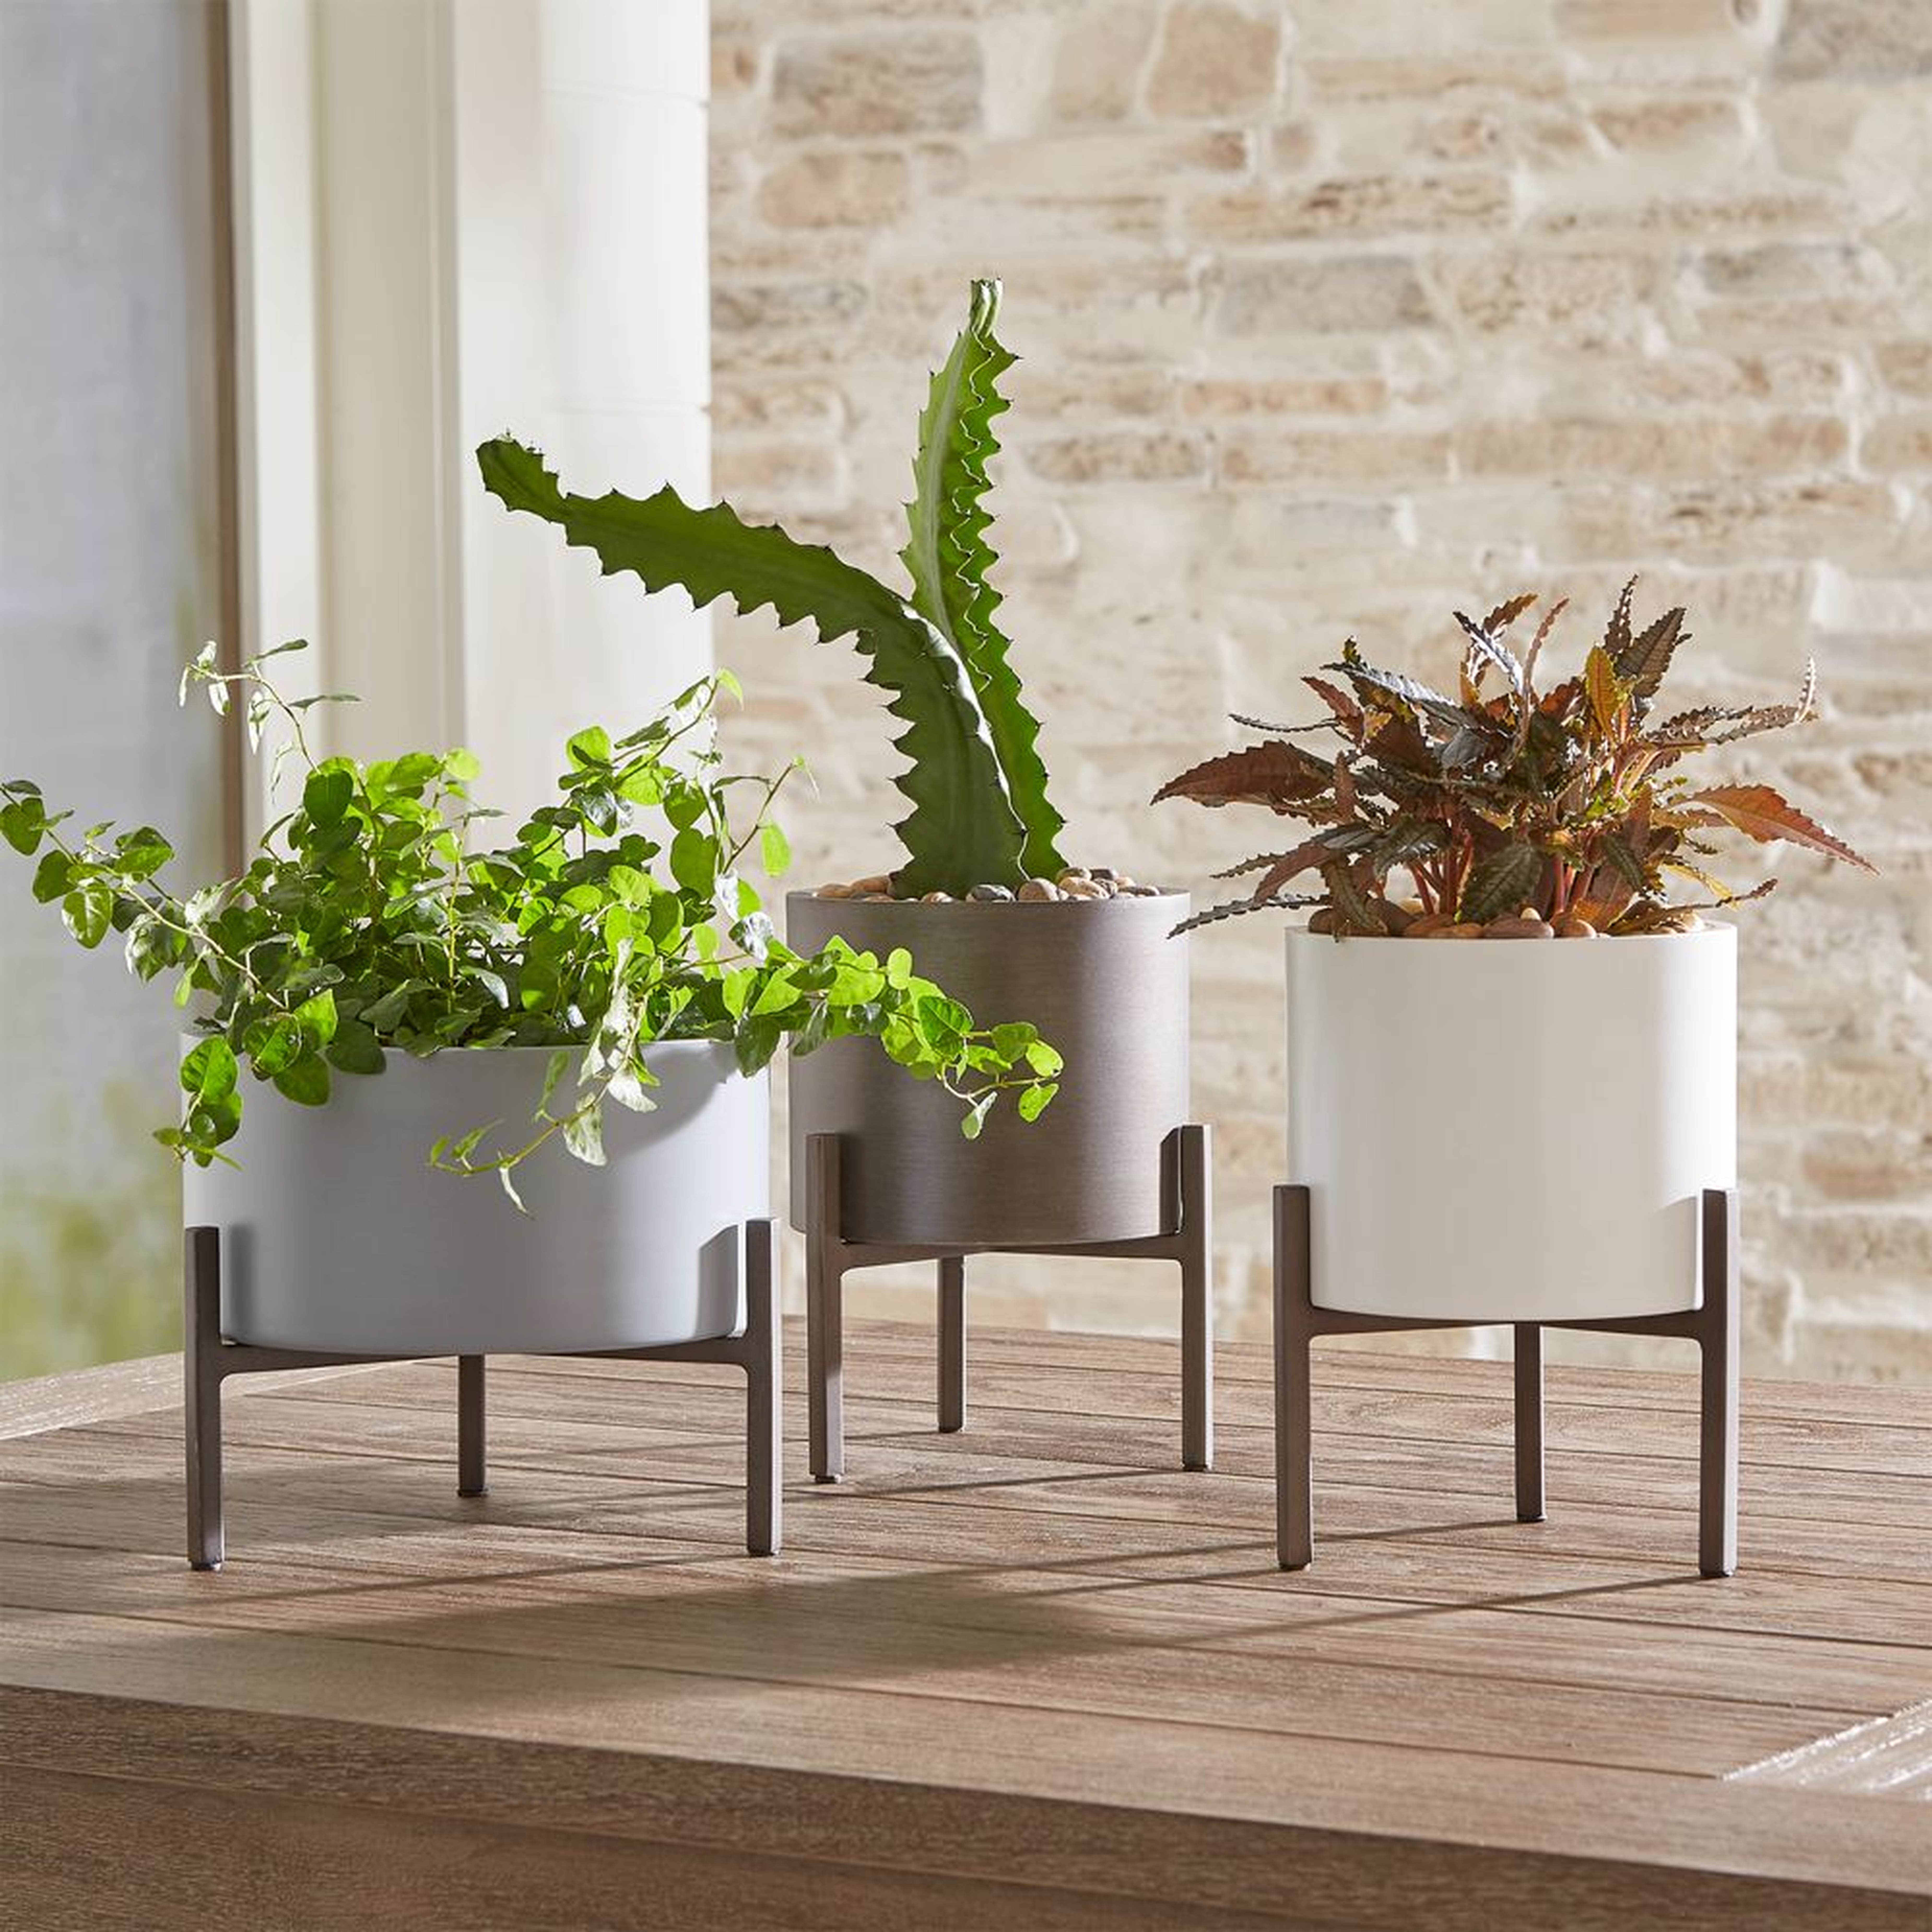 Dundee Tabletop Planters, Set of 3 - Crate and Barrel